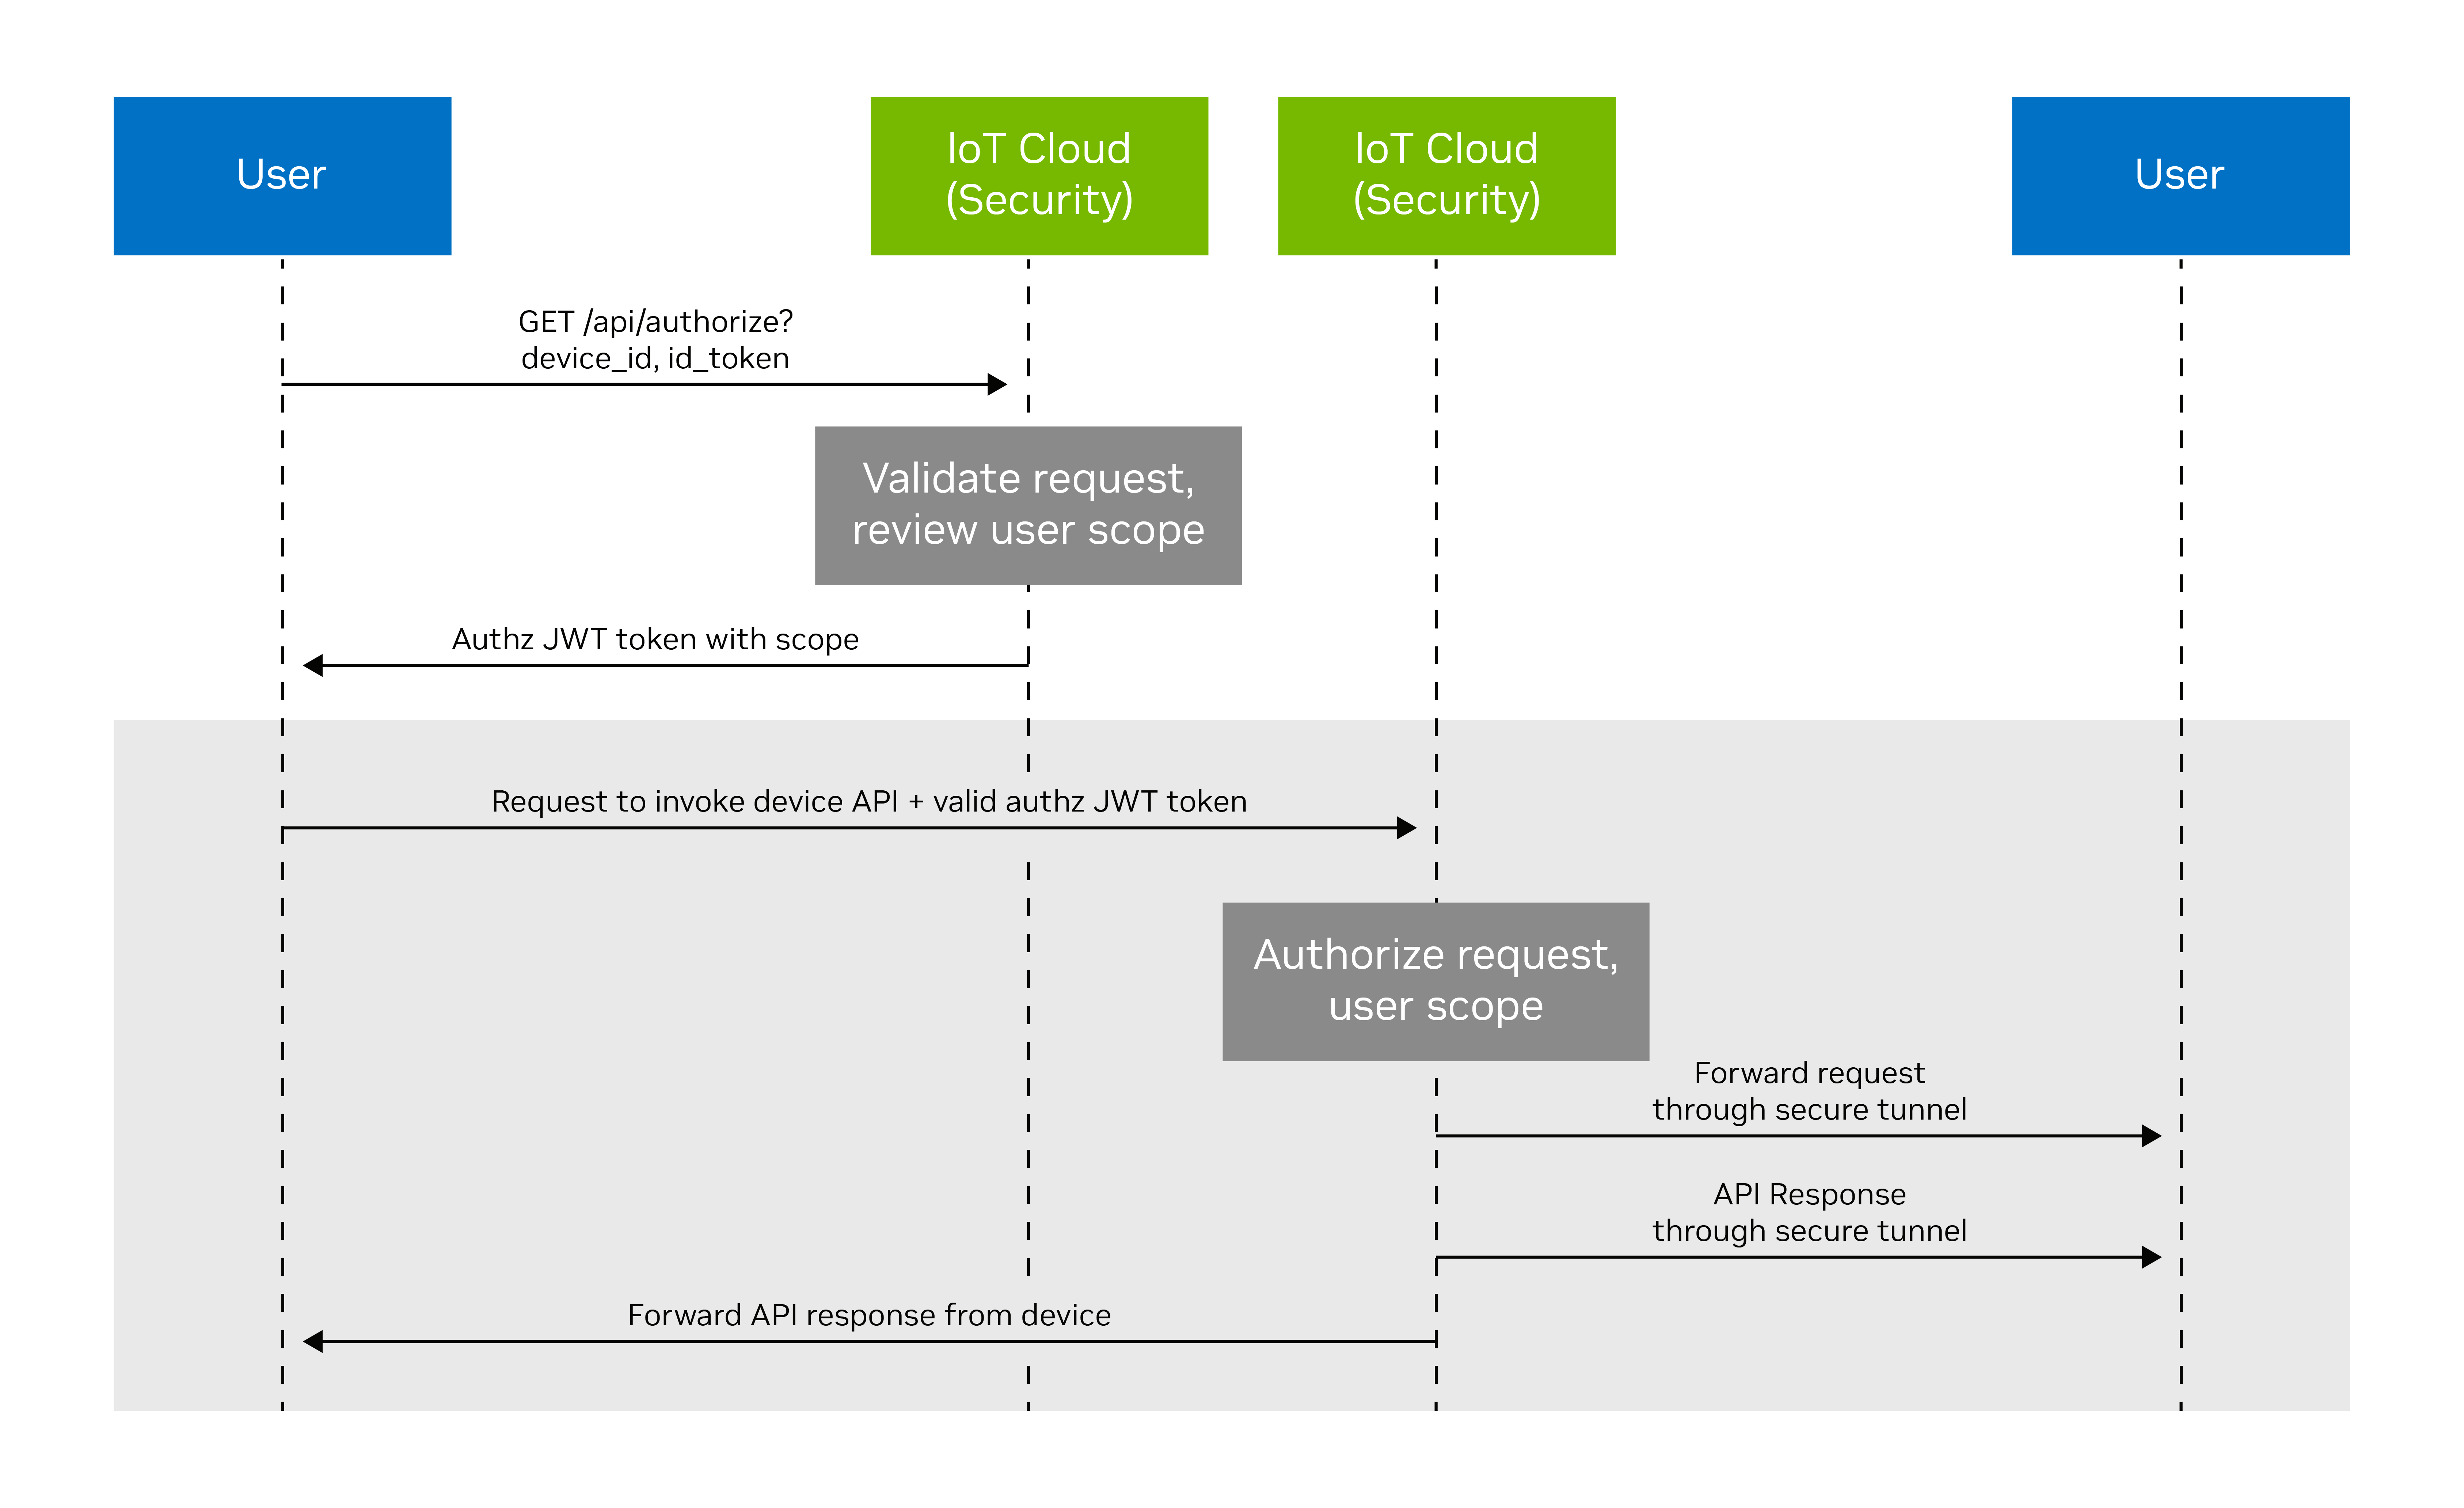 Call flow diagram showing the user initiating the authorization by requesting an authorization token from IoT cloud and using it to invoke the device APIs. 
